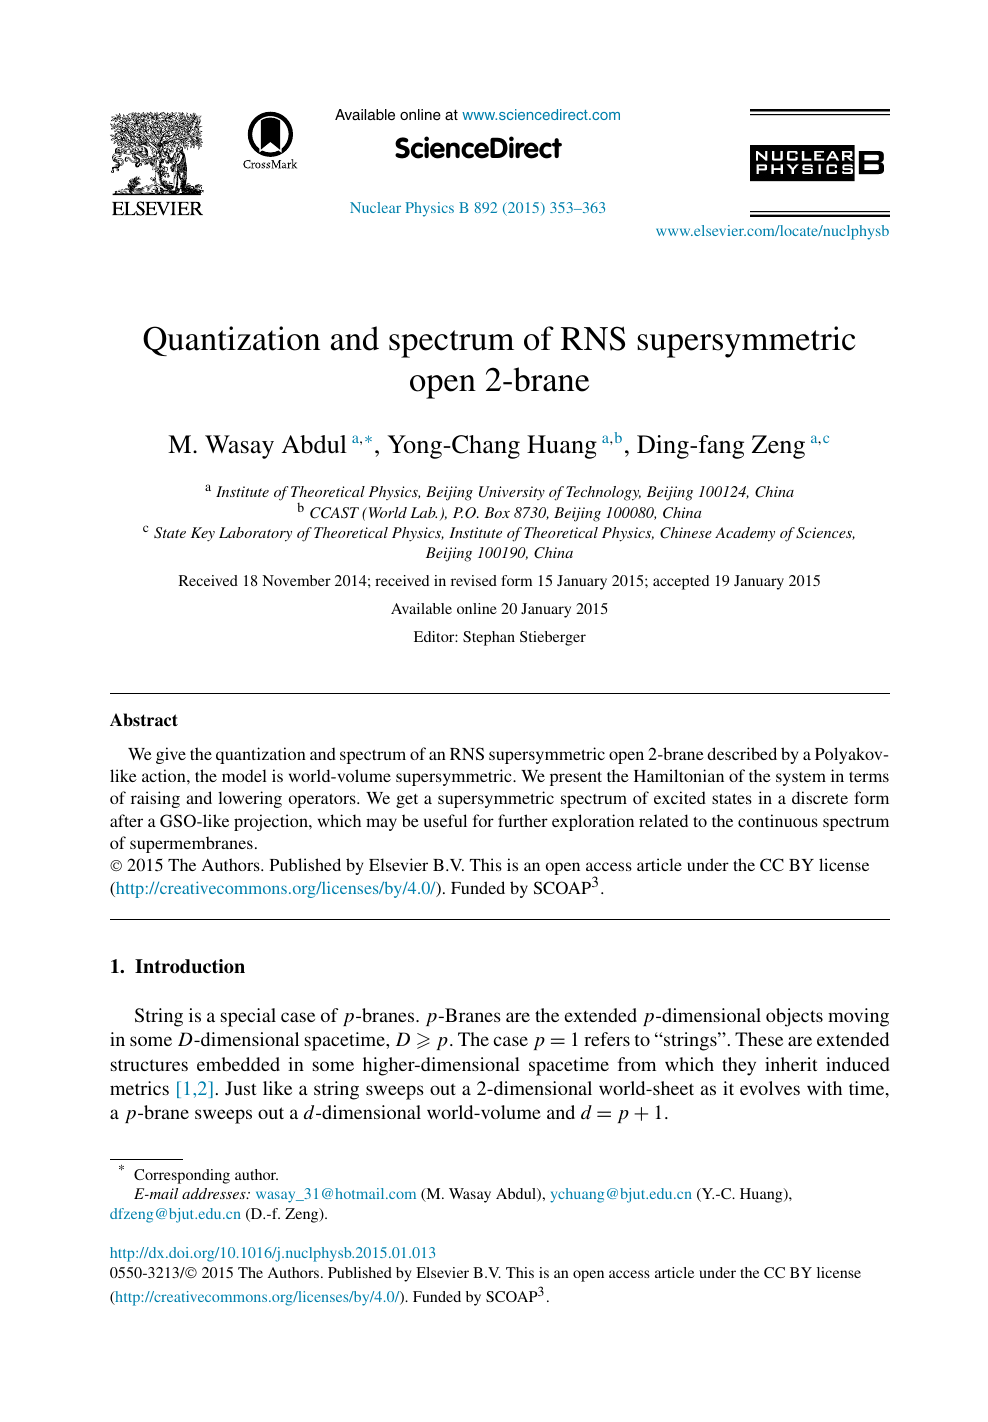 Quantization And Spectrum Of Rns Supersymmetric Open 2 Brane Topic Of Research Paper In Physical Sciences Download Scholarly Article Pdf And Read For Free On Cyberleninka Open Science Hub